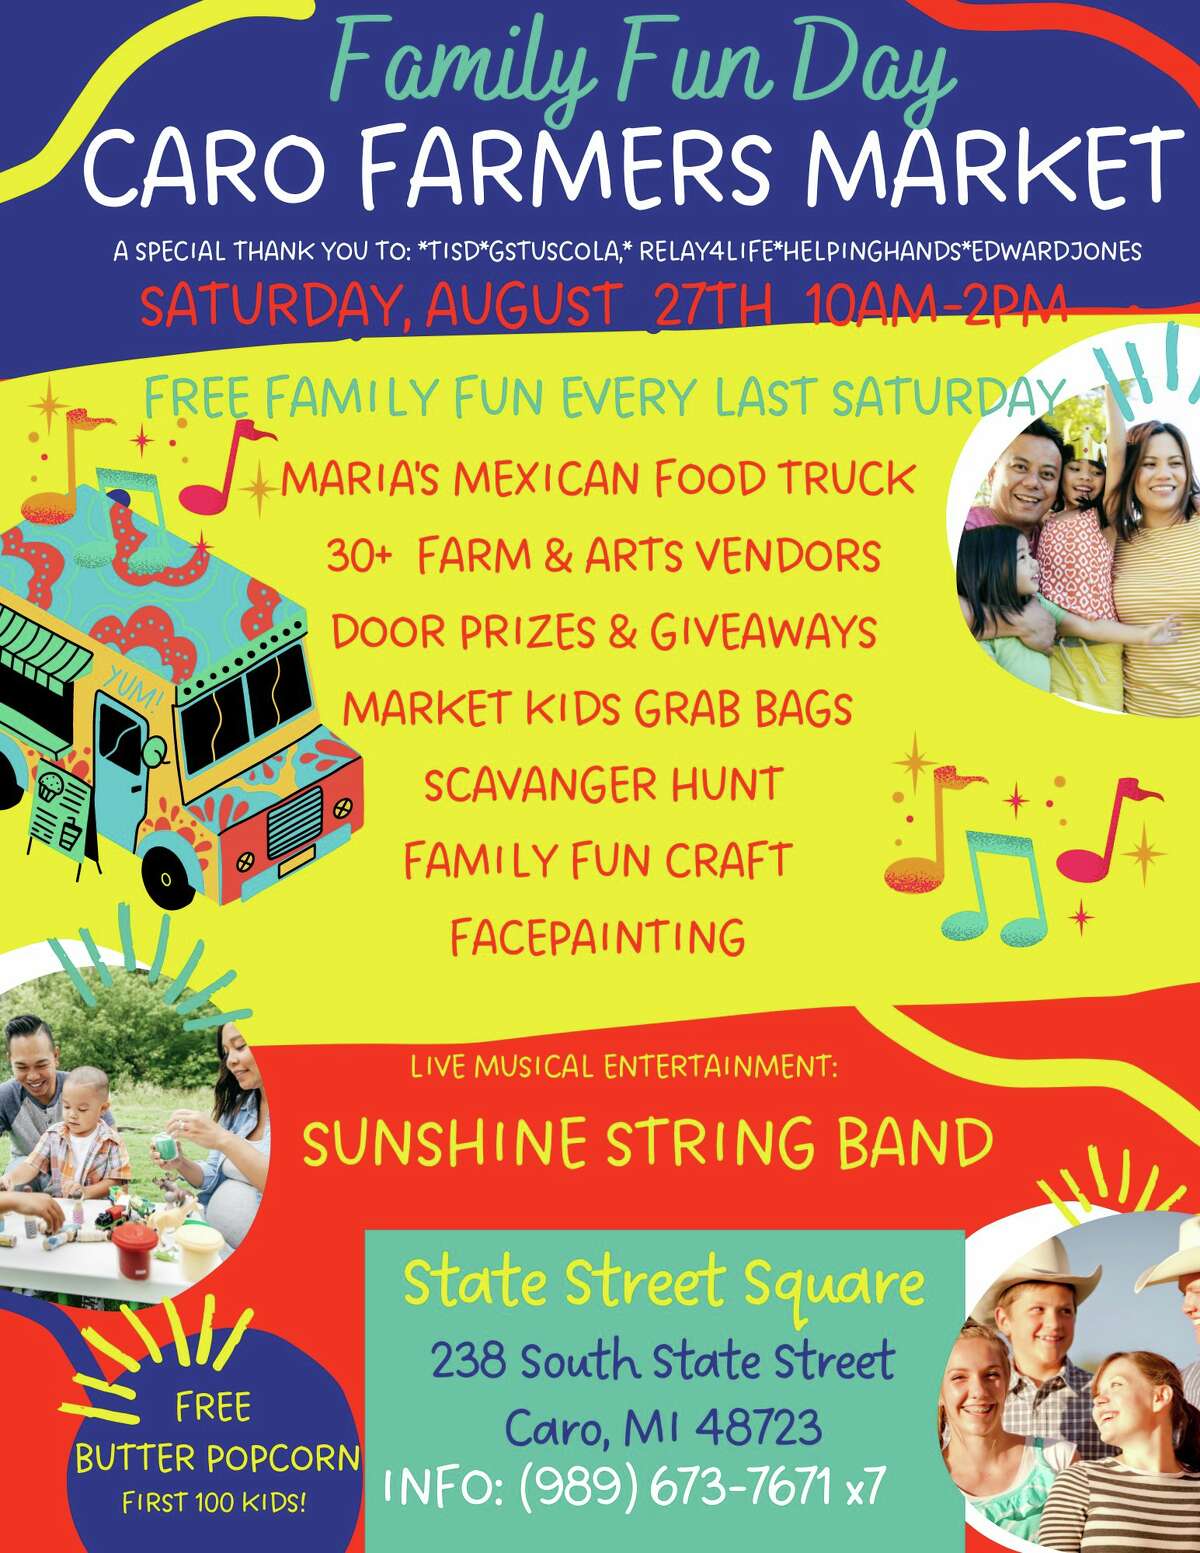 The Caro Farmers Market will be hosting Family Fun Days this Saturday from 10 a.m. to 2 p.m.